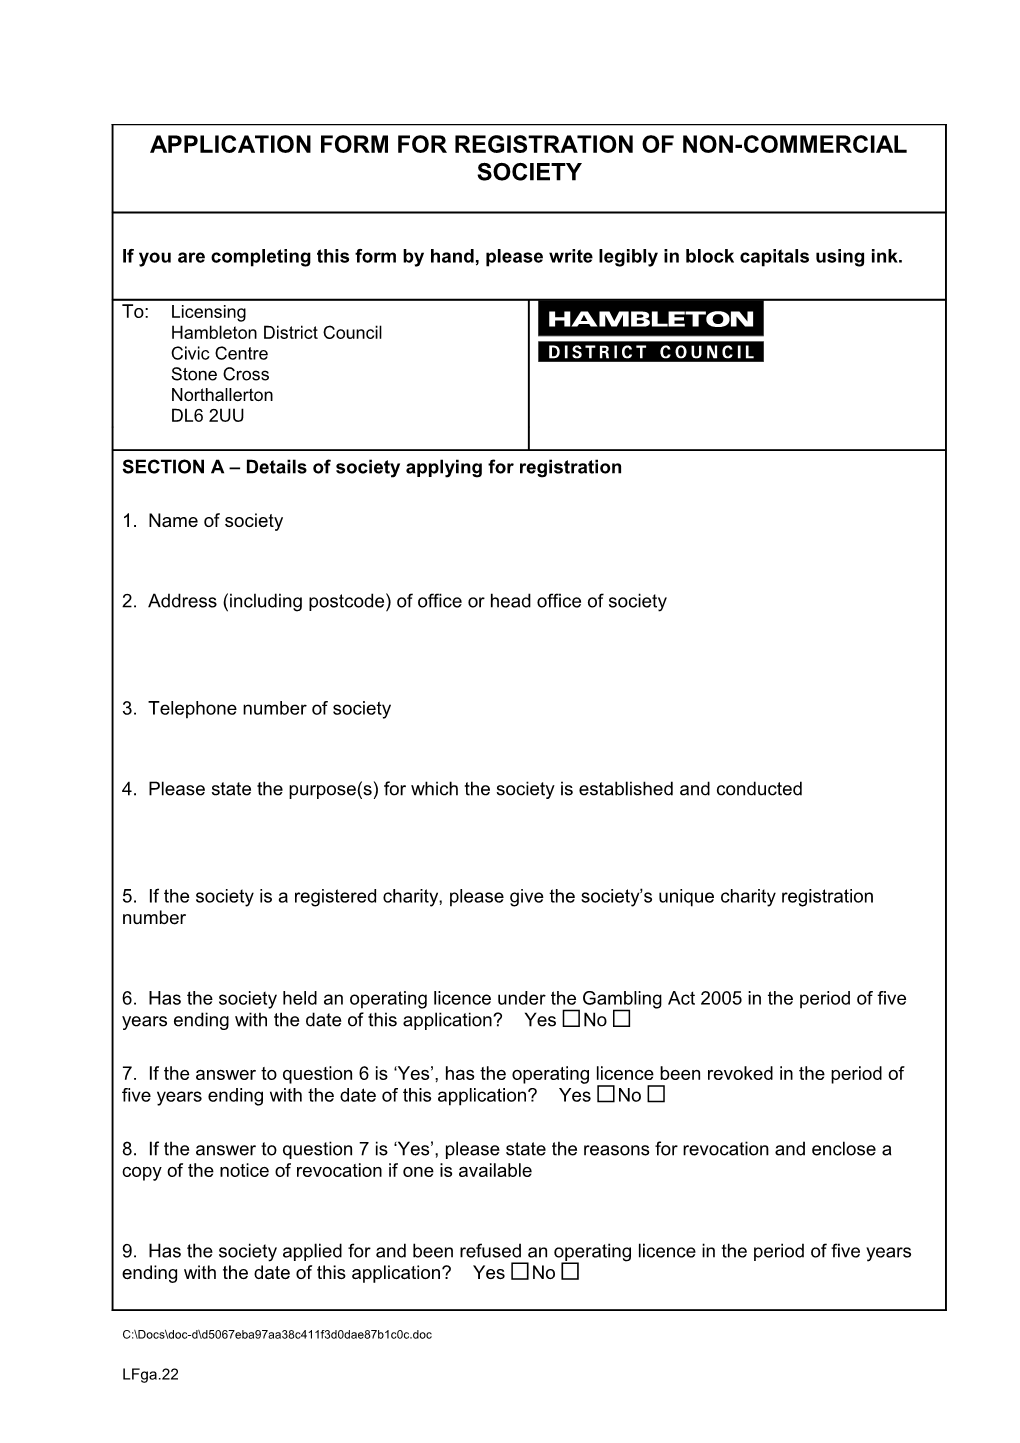 Application Form for Registration of Non-Commercial Society